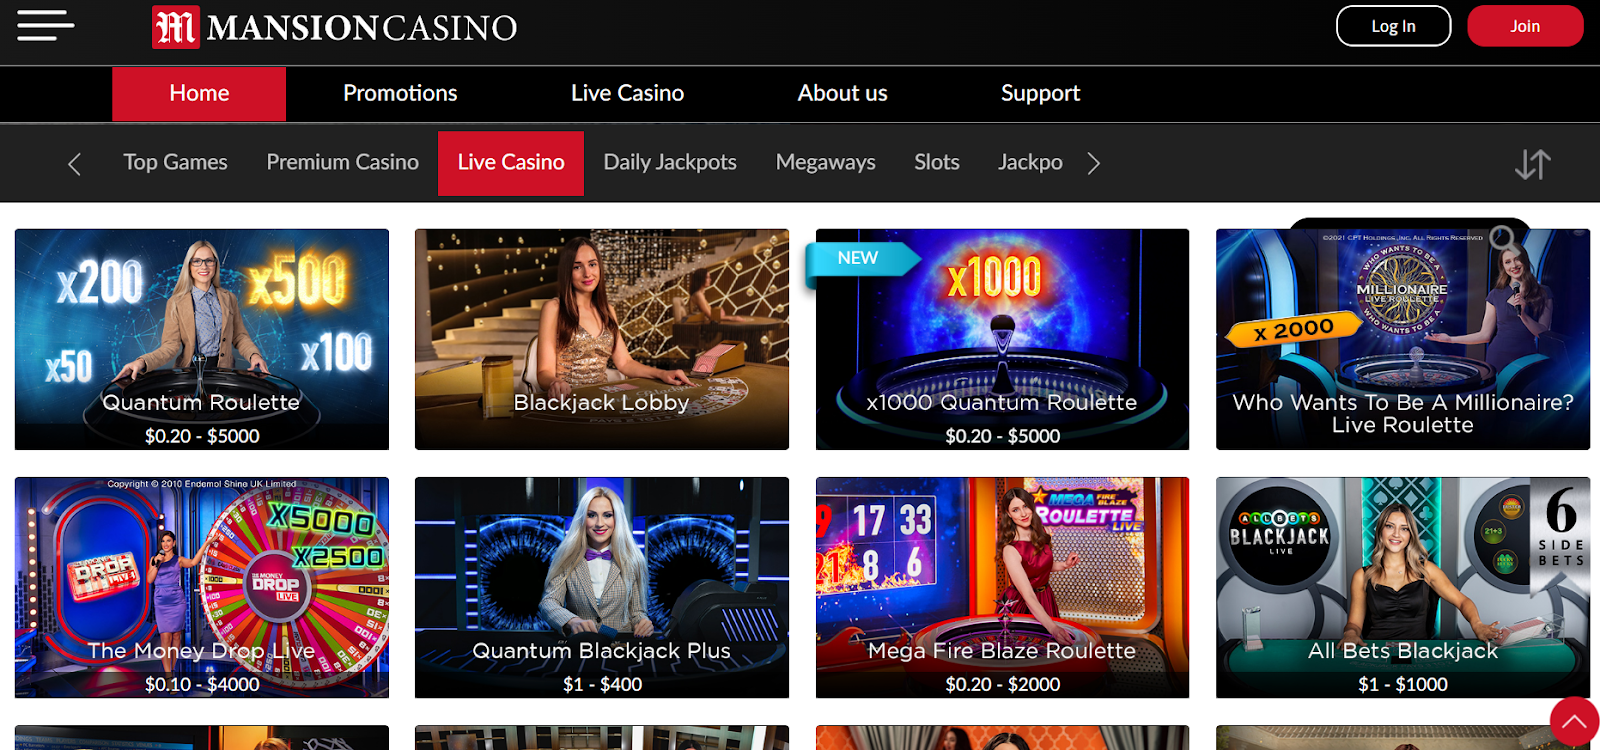 Mansion Casino Online's VIP Program: What You Need to Know